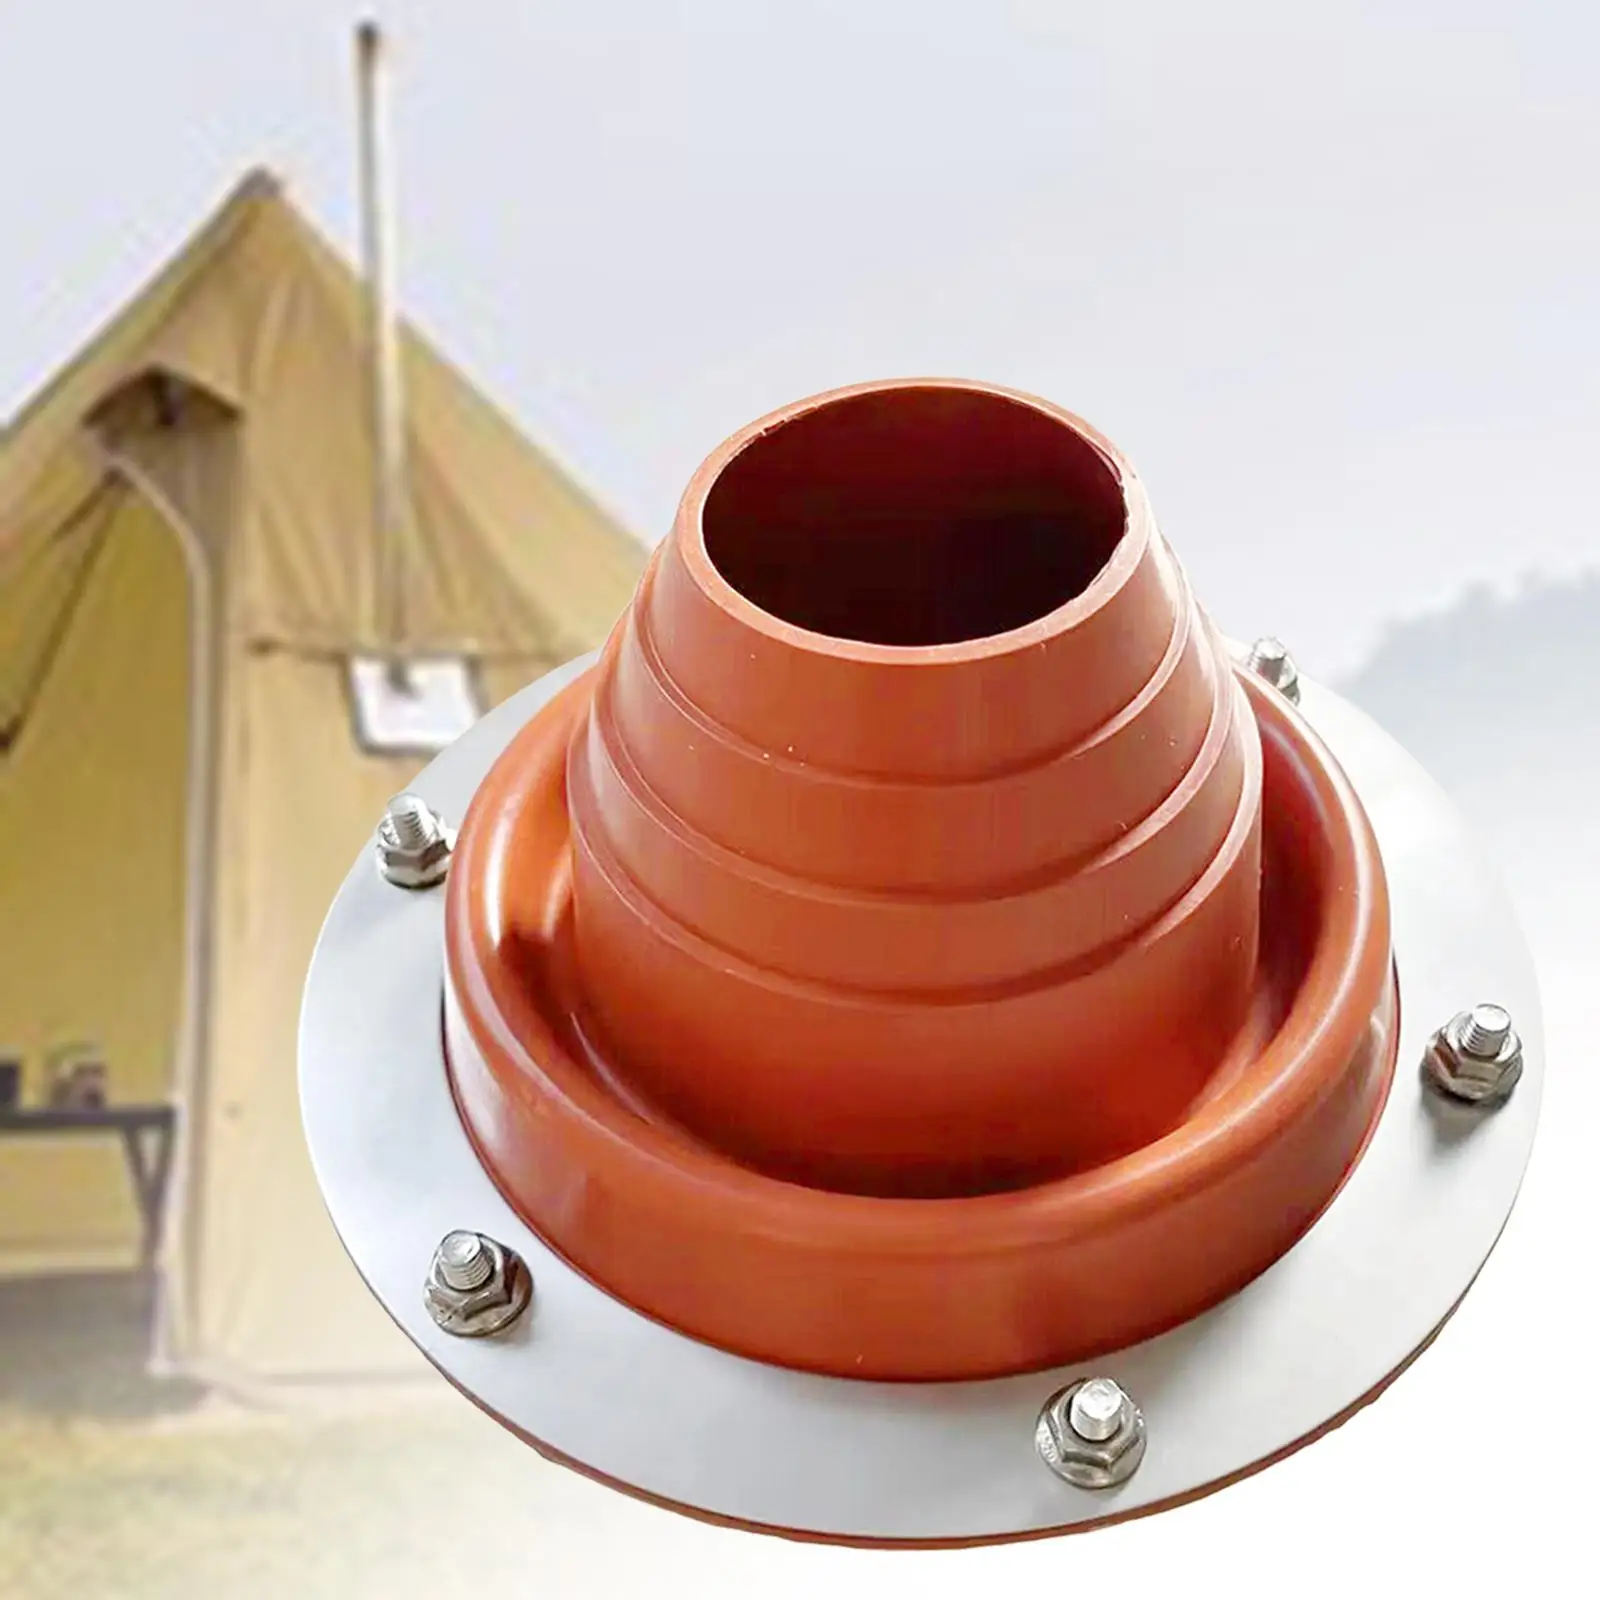 Tent Jack Kit Tent Protection Camping Accessories Flue Flashing Kit